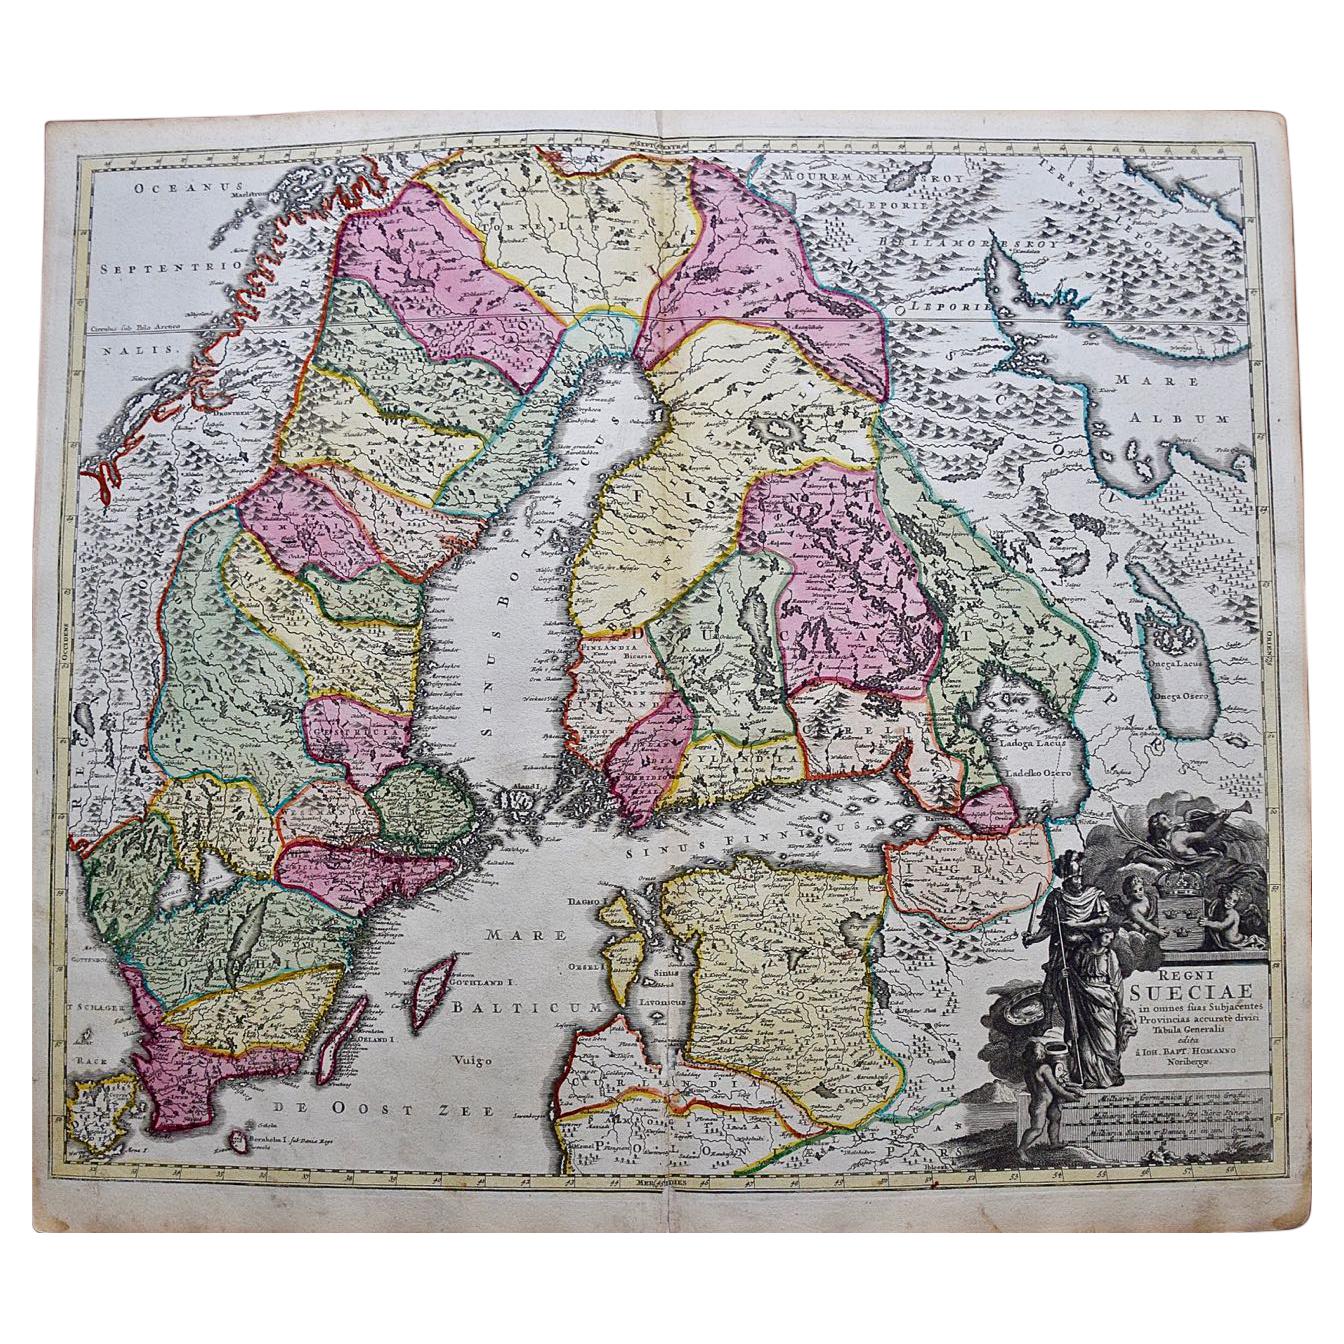 Sweden & Adjacent Portions of Scandinavia: A Hand-Colored 18th C. Map by Homann